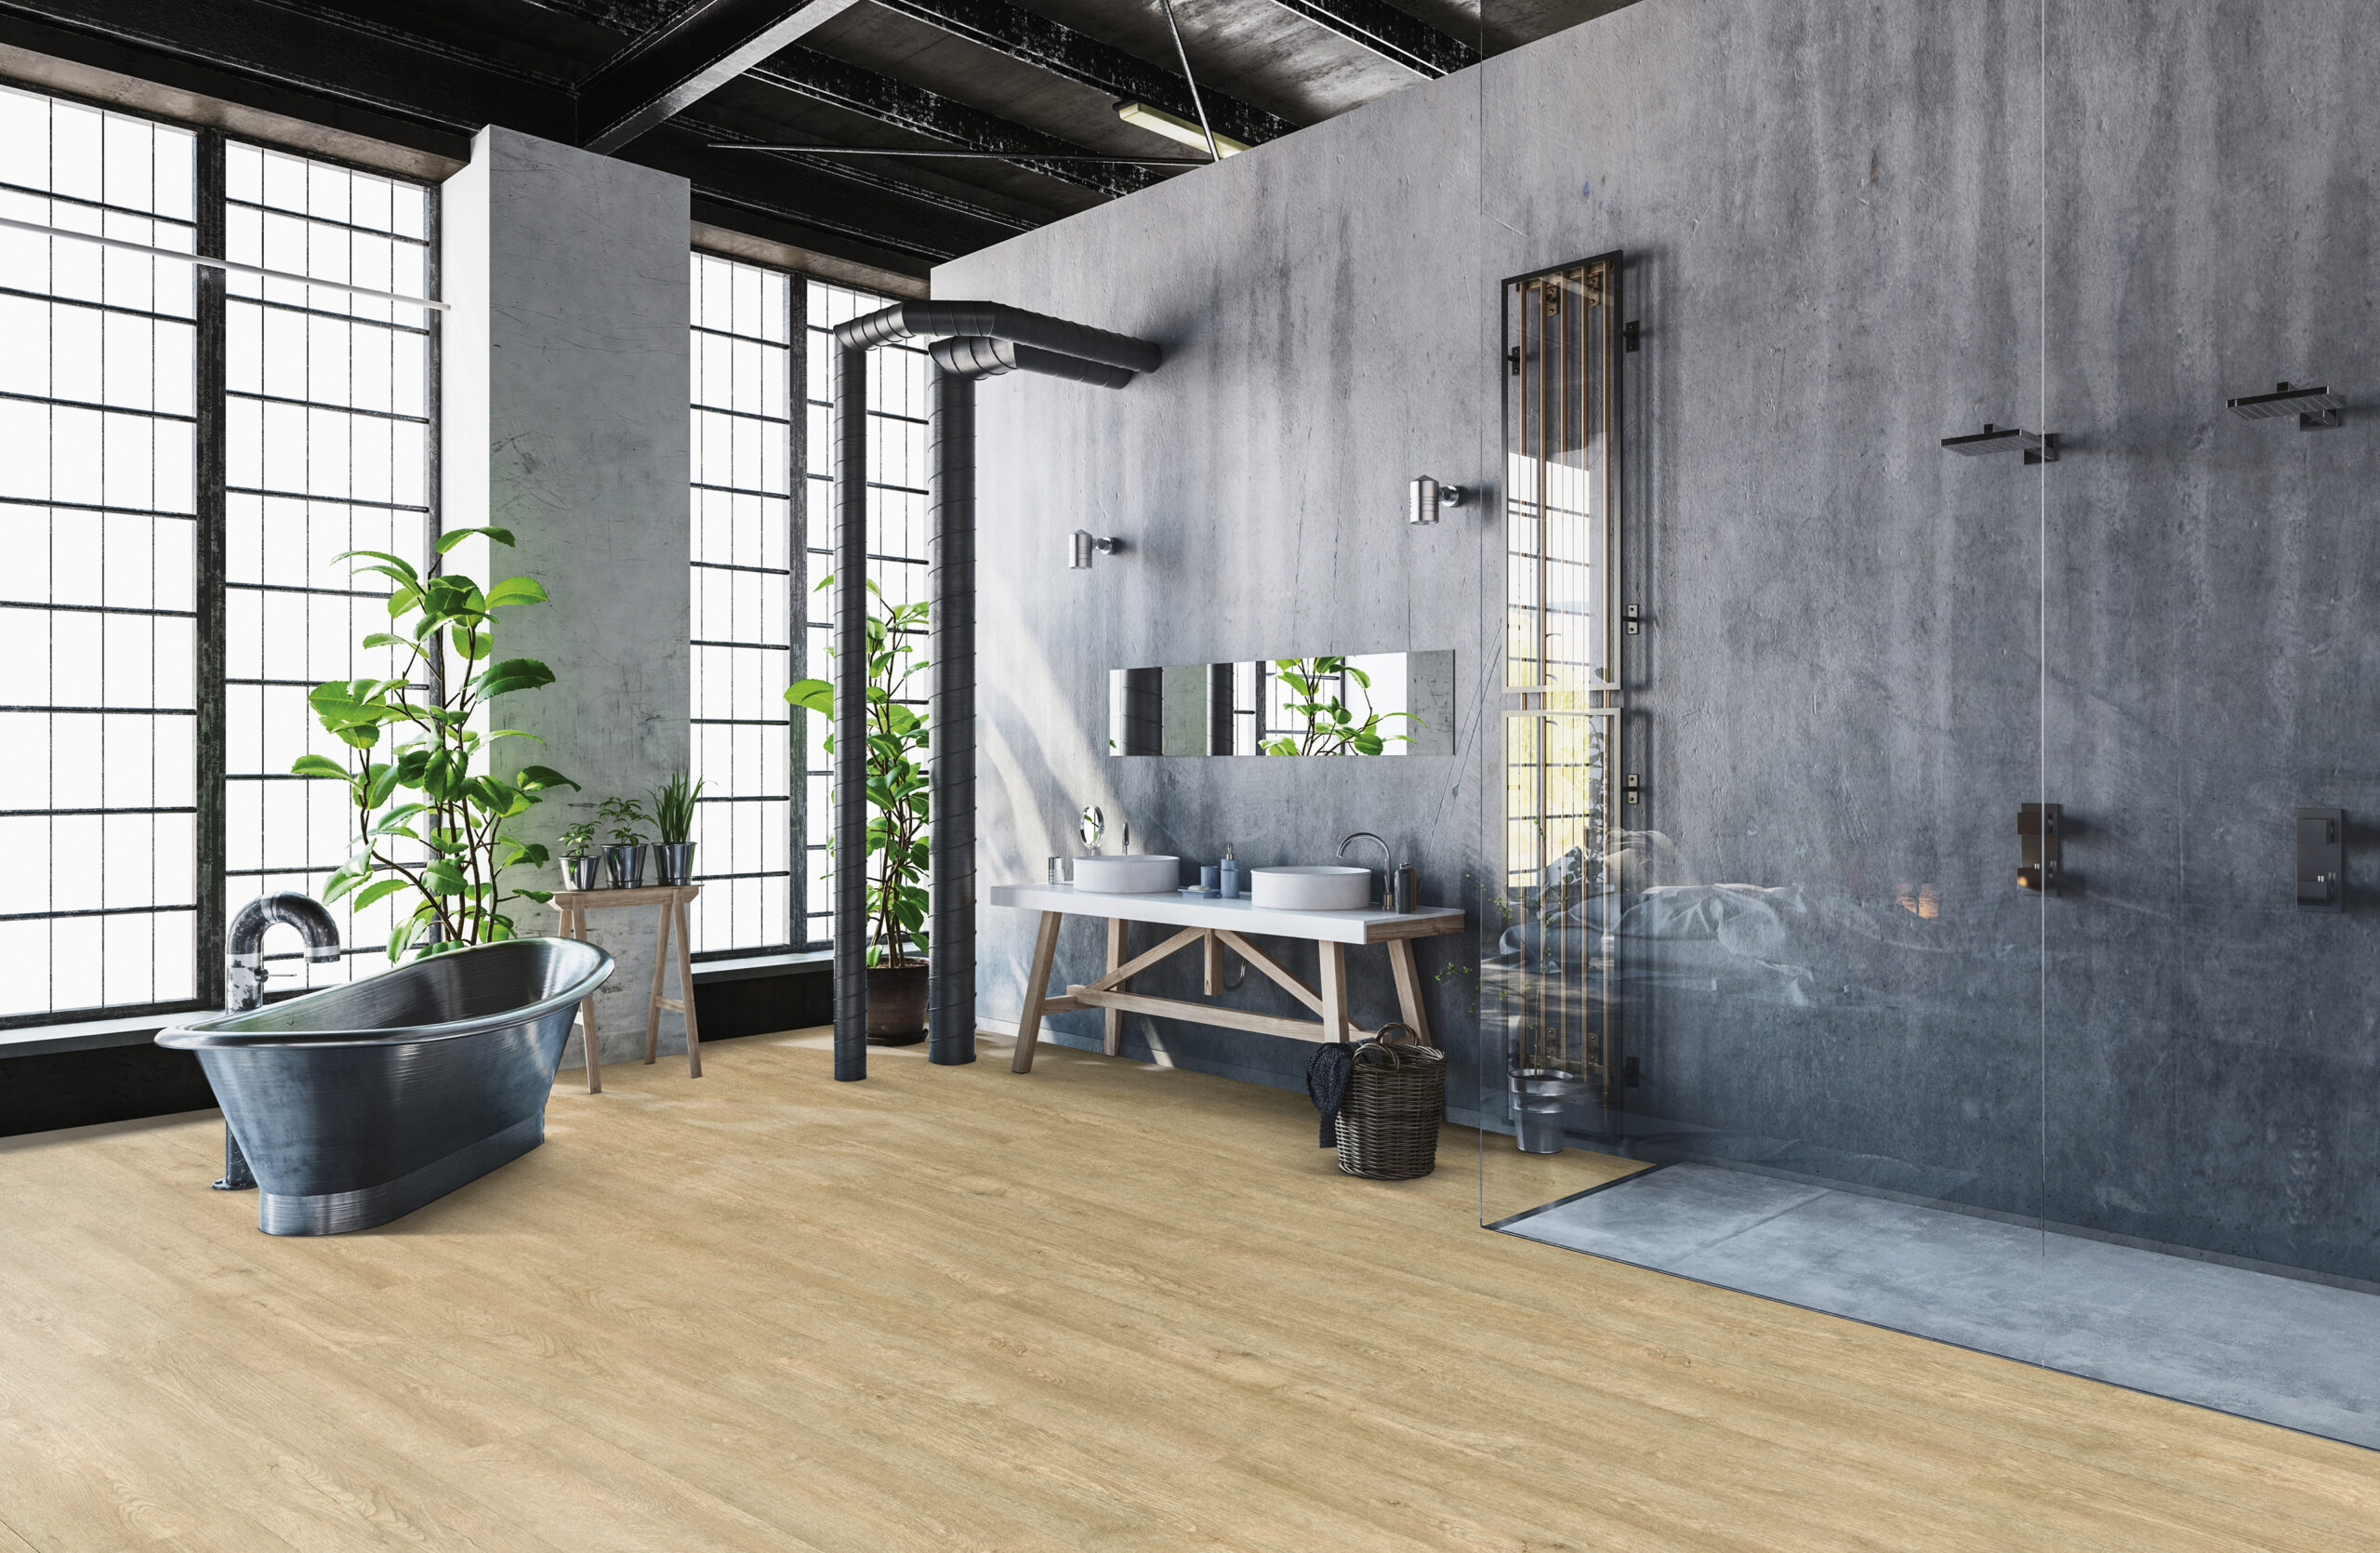 Modern industrial loft conversion into a hipster minimalist bathroom with vintage style metal roll-top bathtub and fresh green potted plants in front of bright windows, 3d rendering